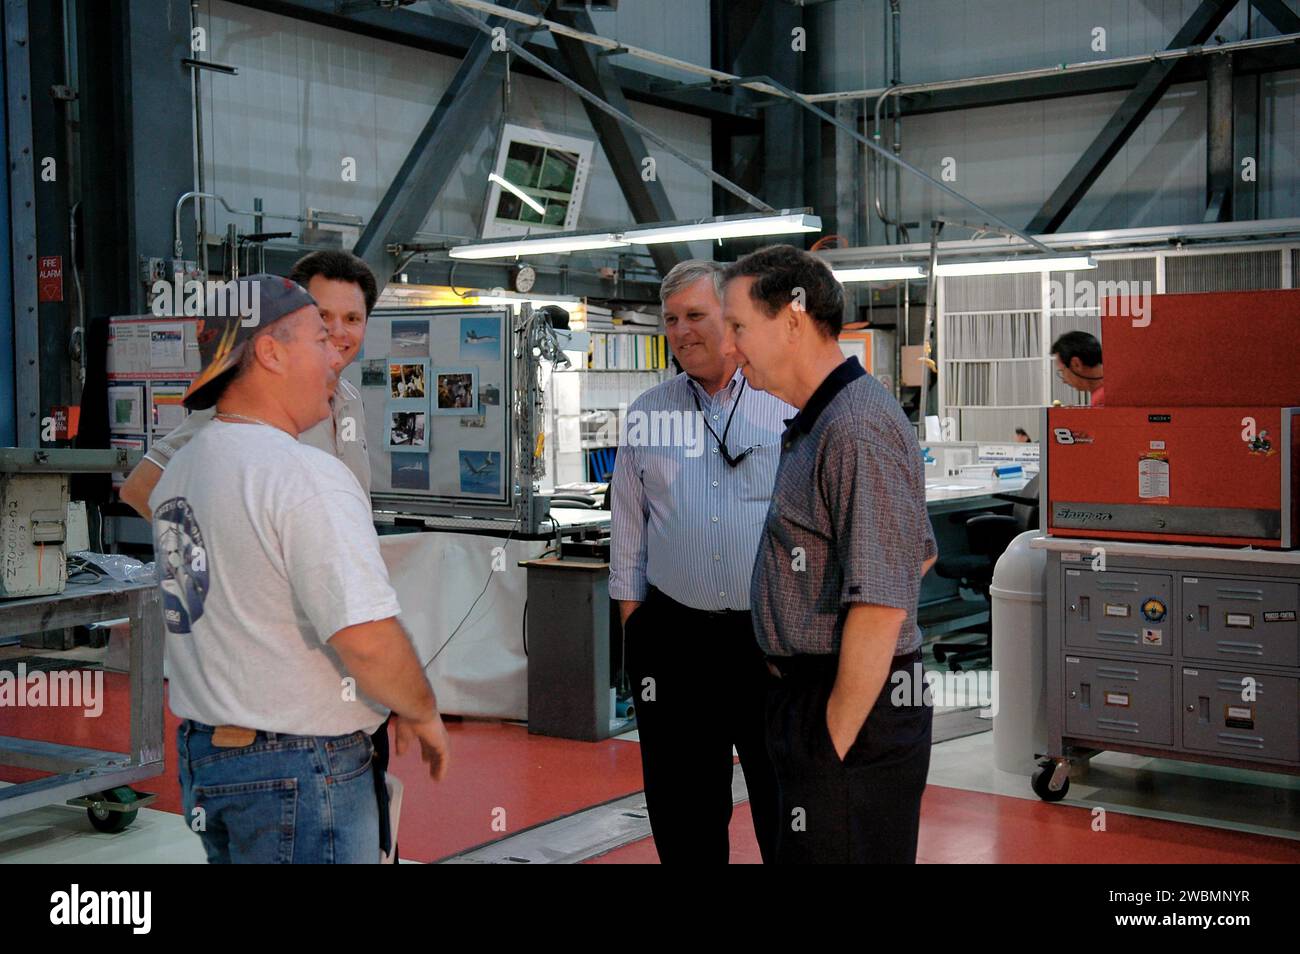 KENNEDY SPACE CENTER, FLA. - Michael Griffin, administrator of the National Aeronautics and Space Administration (NASA), talks to United Space Alliance advanced systems technician Richard Van Wart during a tour of Orbiter Processing Facility bay 1. From left are Van Wart, Space Shuttle Atlantis vehicle manager Scott Thurston, Center Director James Kennedy, and Griffin. Space Shuttle Atlantis is being processed for the second Return to Flight mission, STS-121, in the facility. This is Griffin's first official visit to Kennedy Space Center. Griffin is the 11th administrator of NASA, a role he as Stock Photo